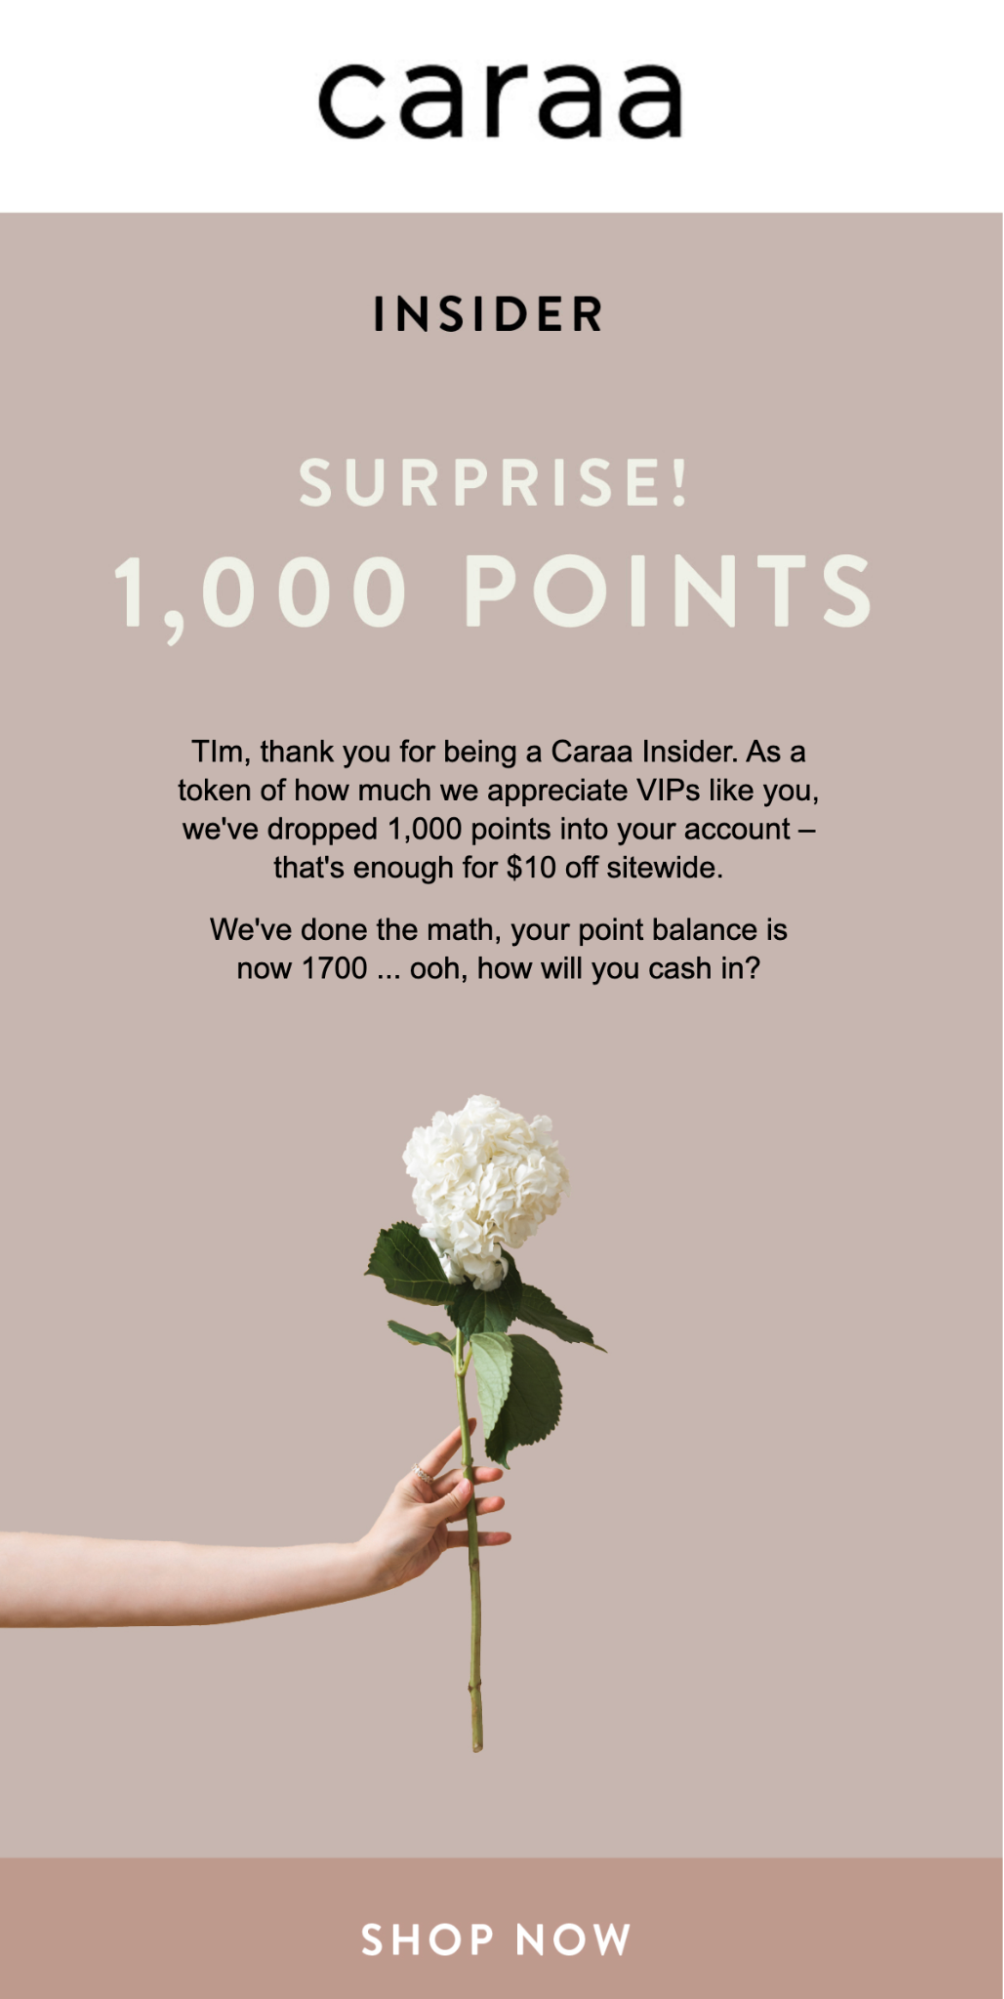 An email from Caraa offering its VIP customers 1,000 reward points for their loyalty.